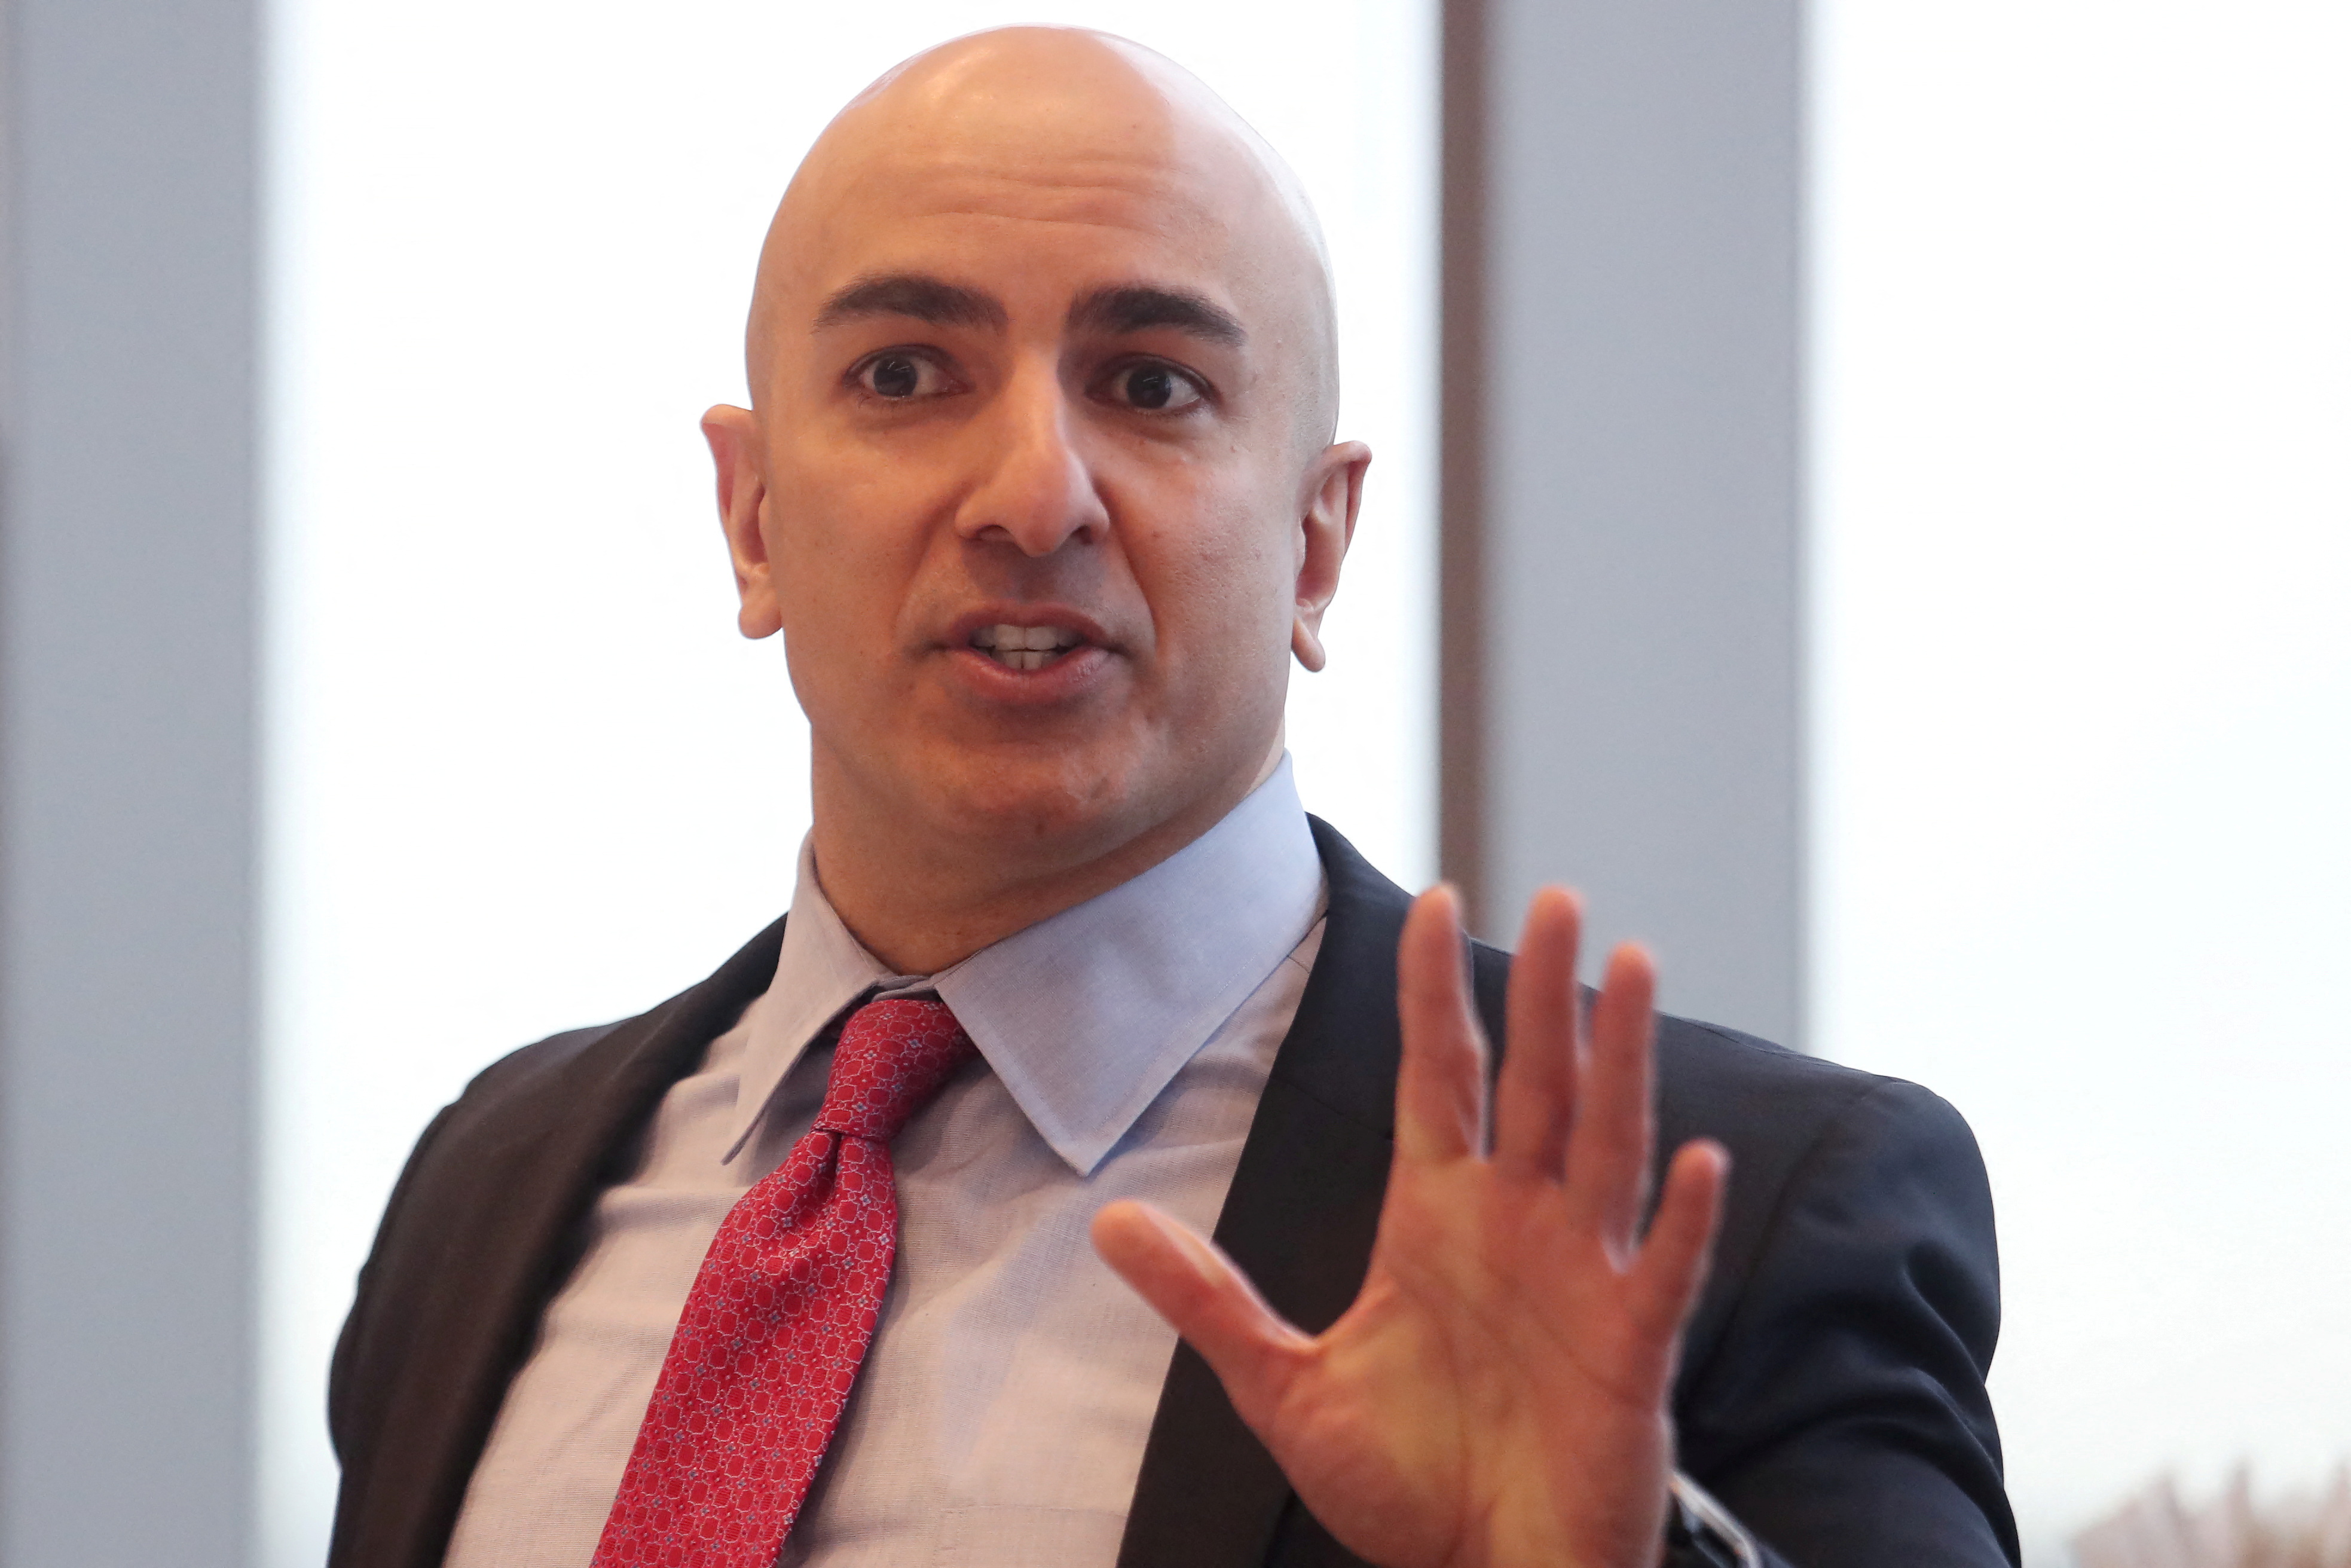 President of the Federal Reserve Bank on Minneapolis Neel Kashkari speaks during an interview in New York